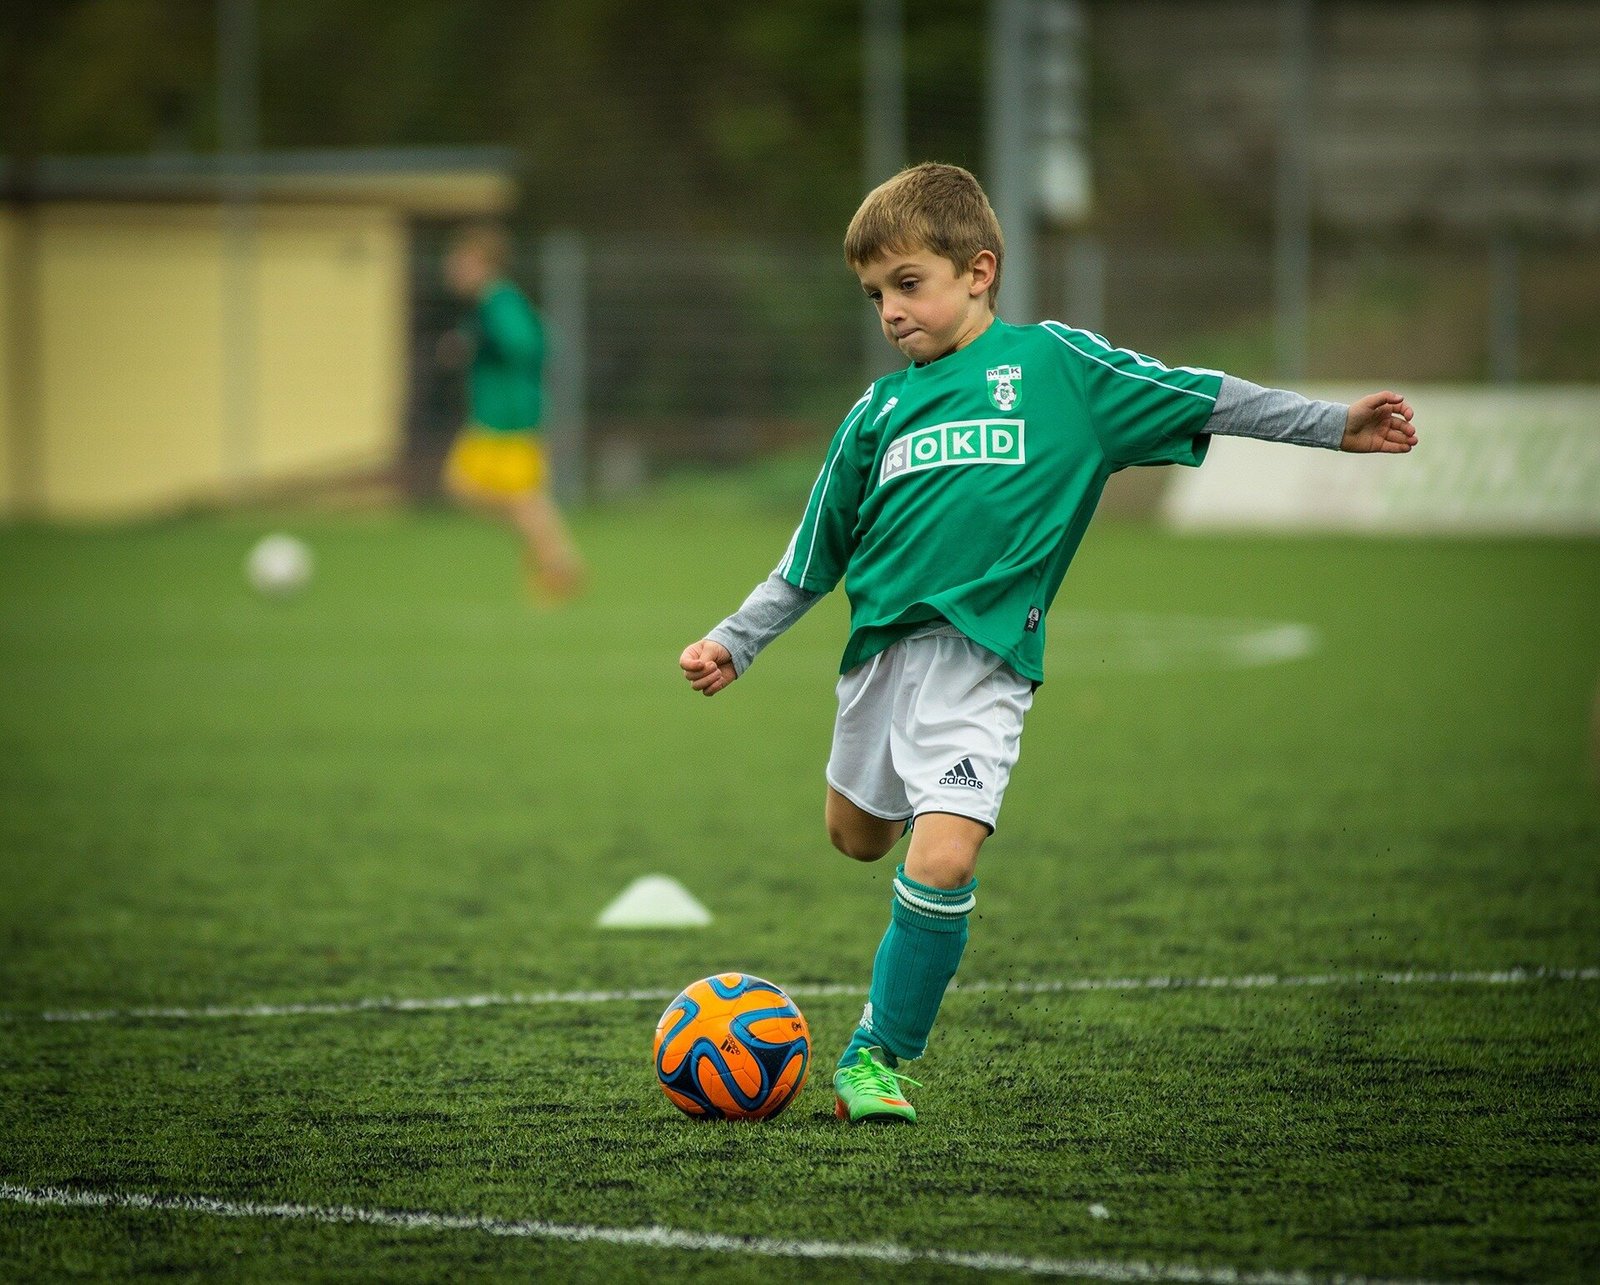 The problem with seeing young sportspeople as athletes first children second